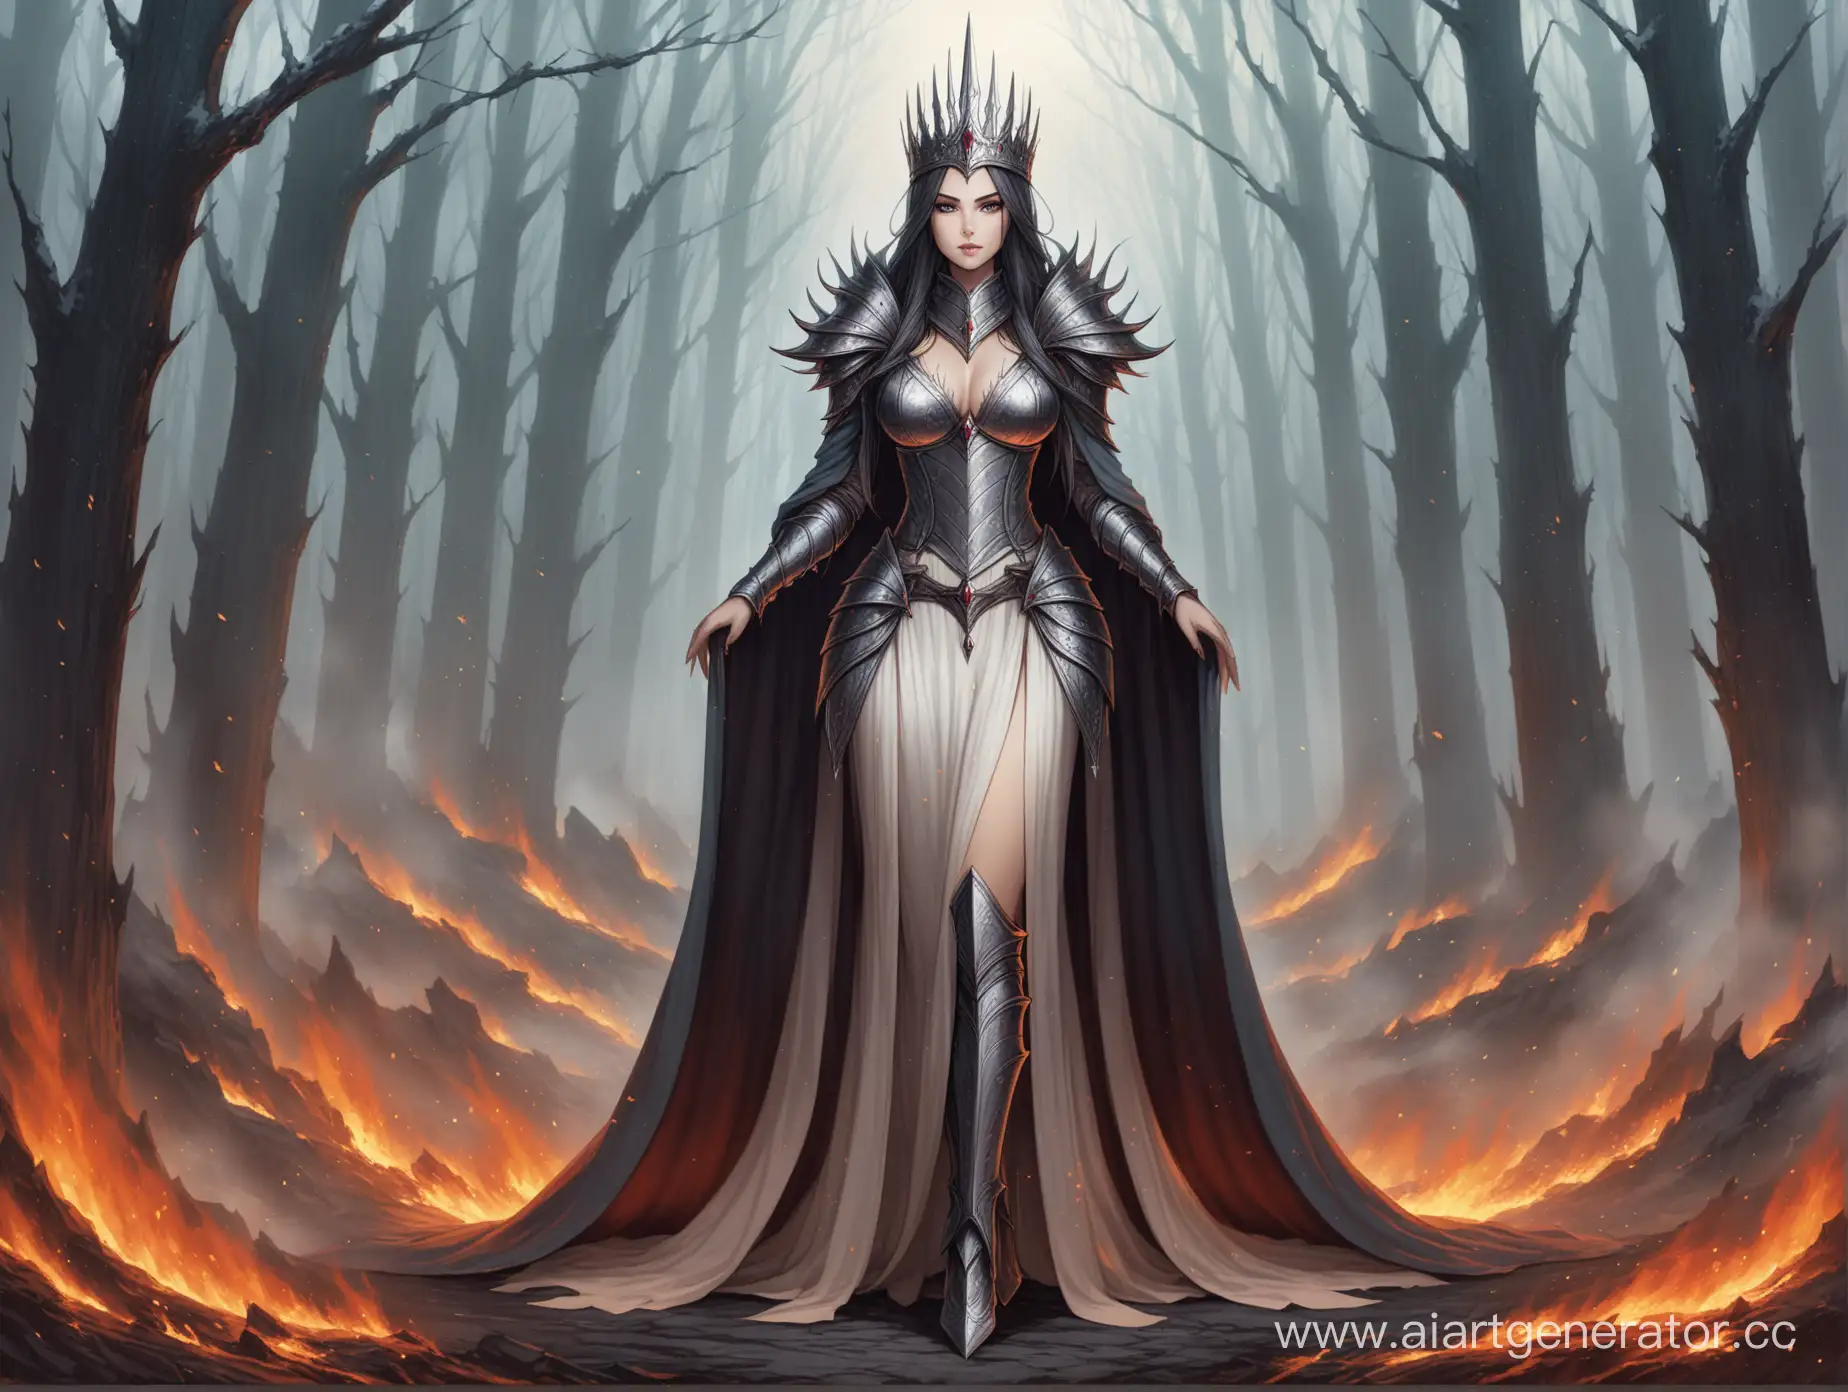 Medieval-Fantasy-Queen-of-Ashes-in-Full-Growth-Art